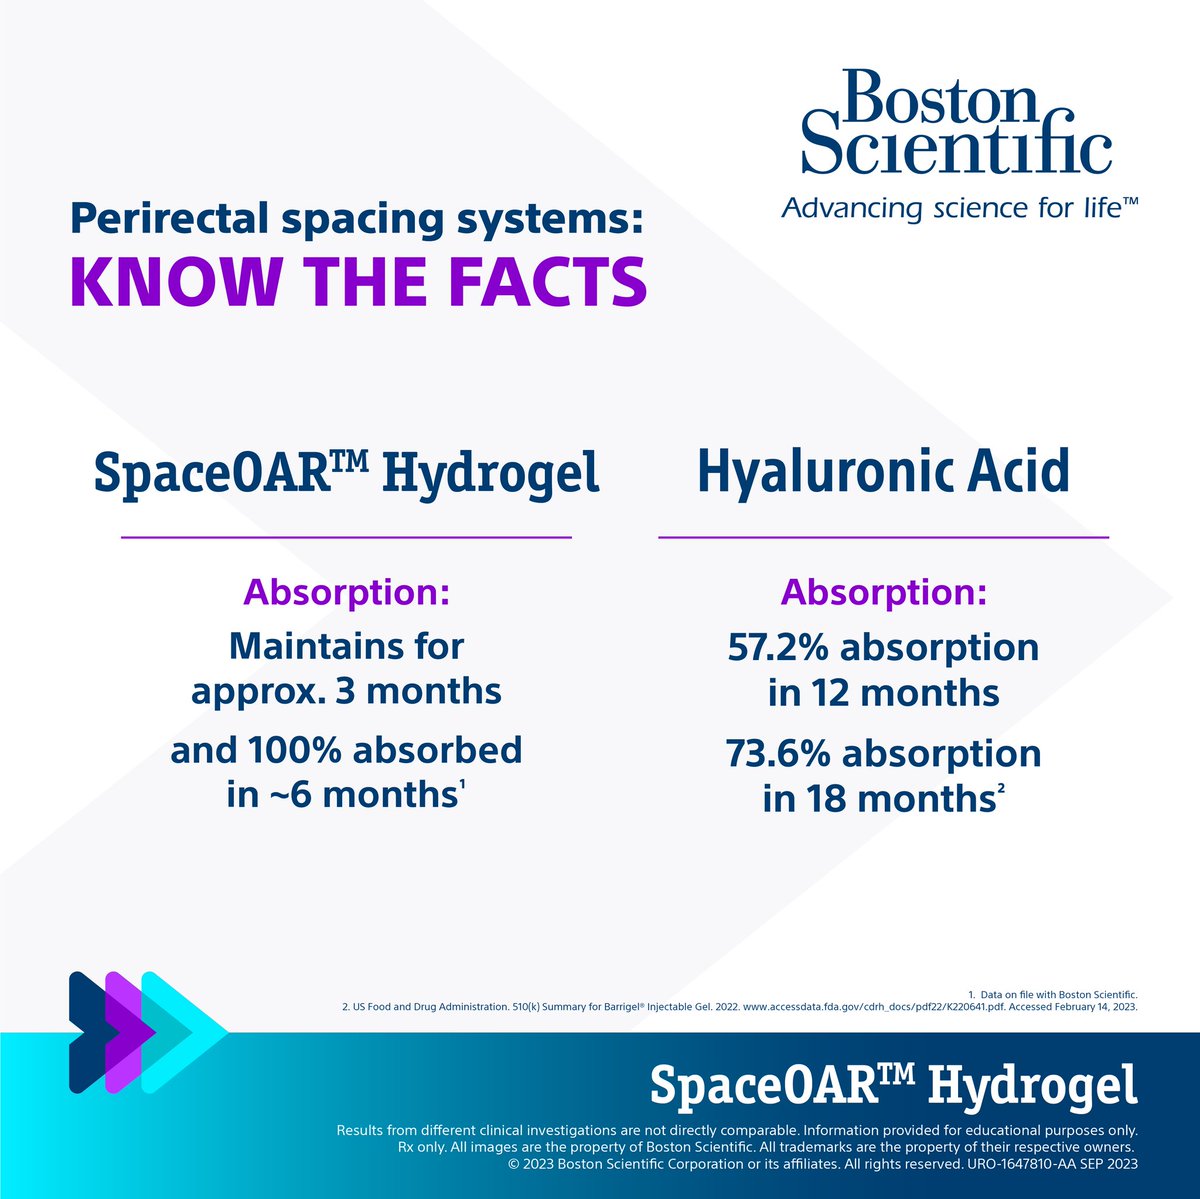 Create space where (and when) needed. #SpaceOAR Hydrogel's PEG-based material is designed to be absorbed in ~6 months. See how: bit.ly/45PVpGp